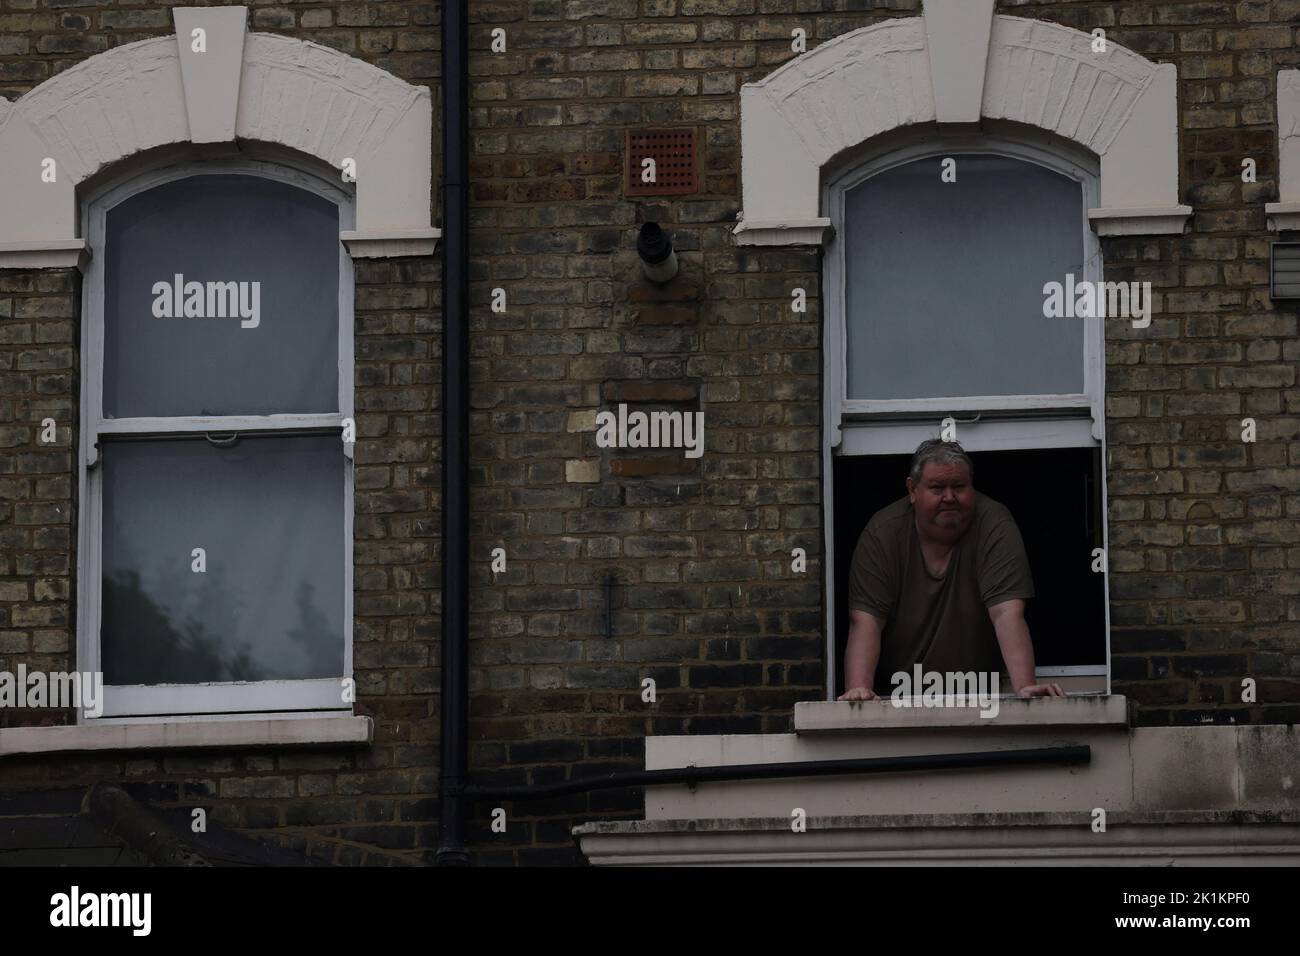 A man looks on from a window on the day of the state funeral and burial of Britain's Queen Elizabeth, in London, Britain, September 19, 2022. REUTERS/Carlos Barria Stock Photo